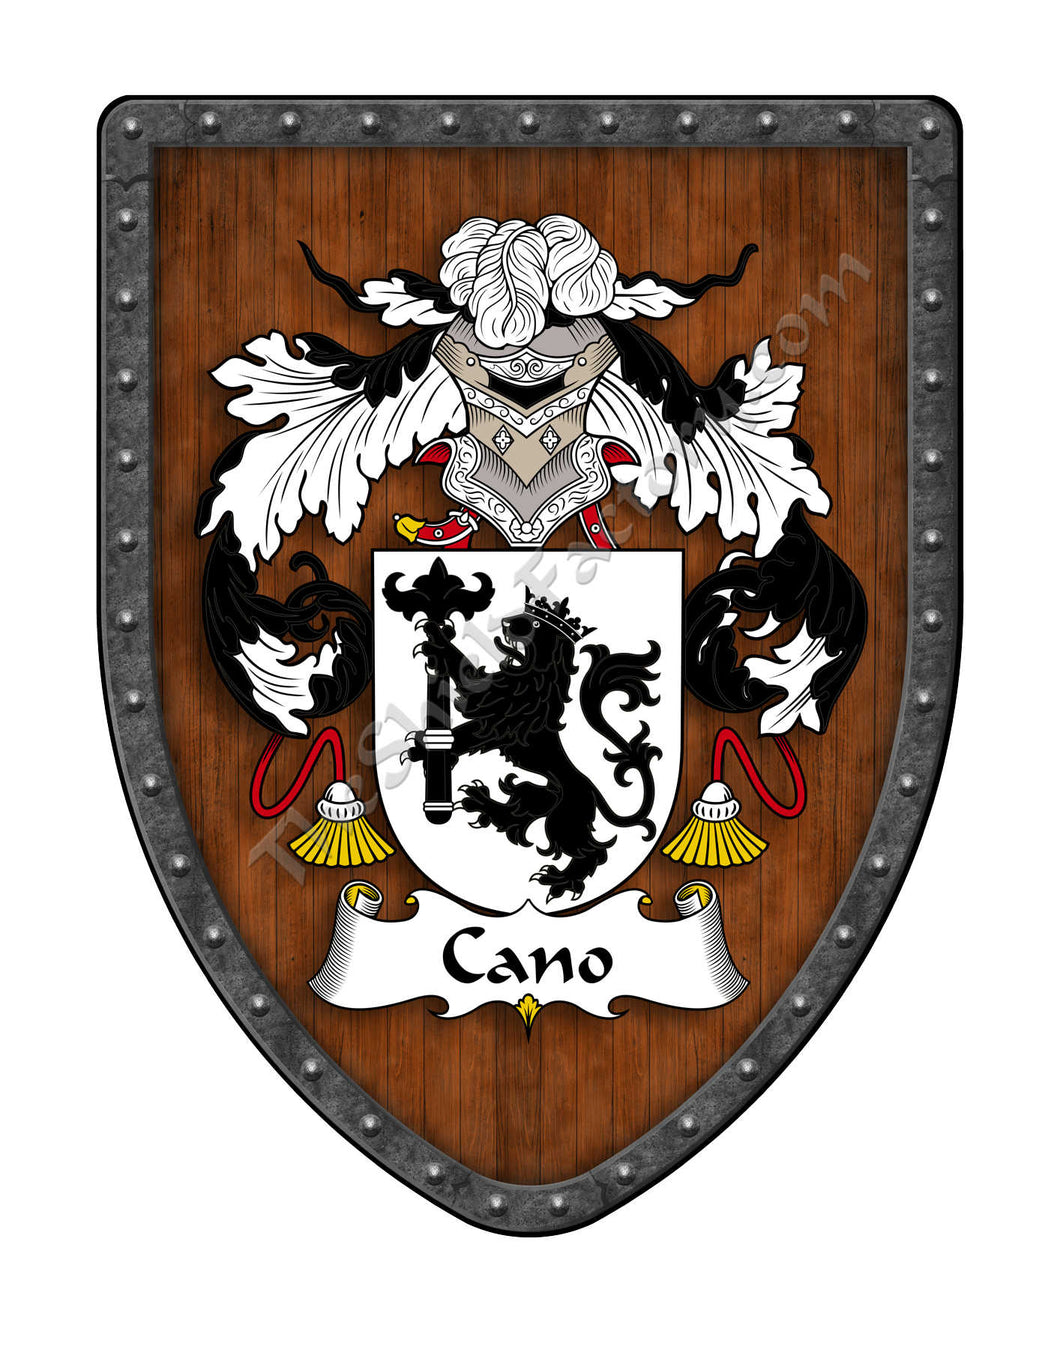 Cano Coat of Arms Family Crest Shield